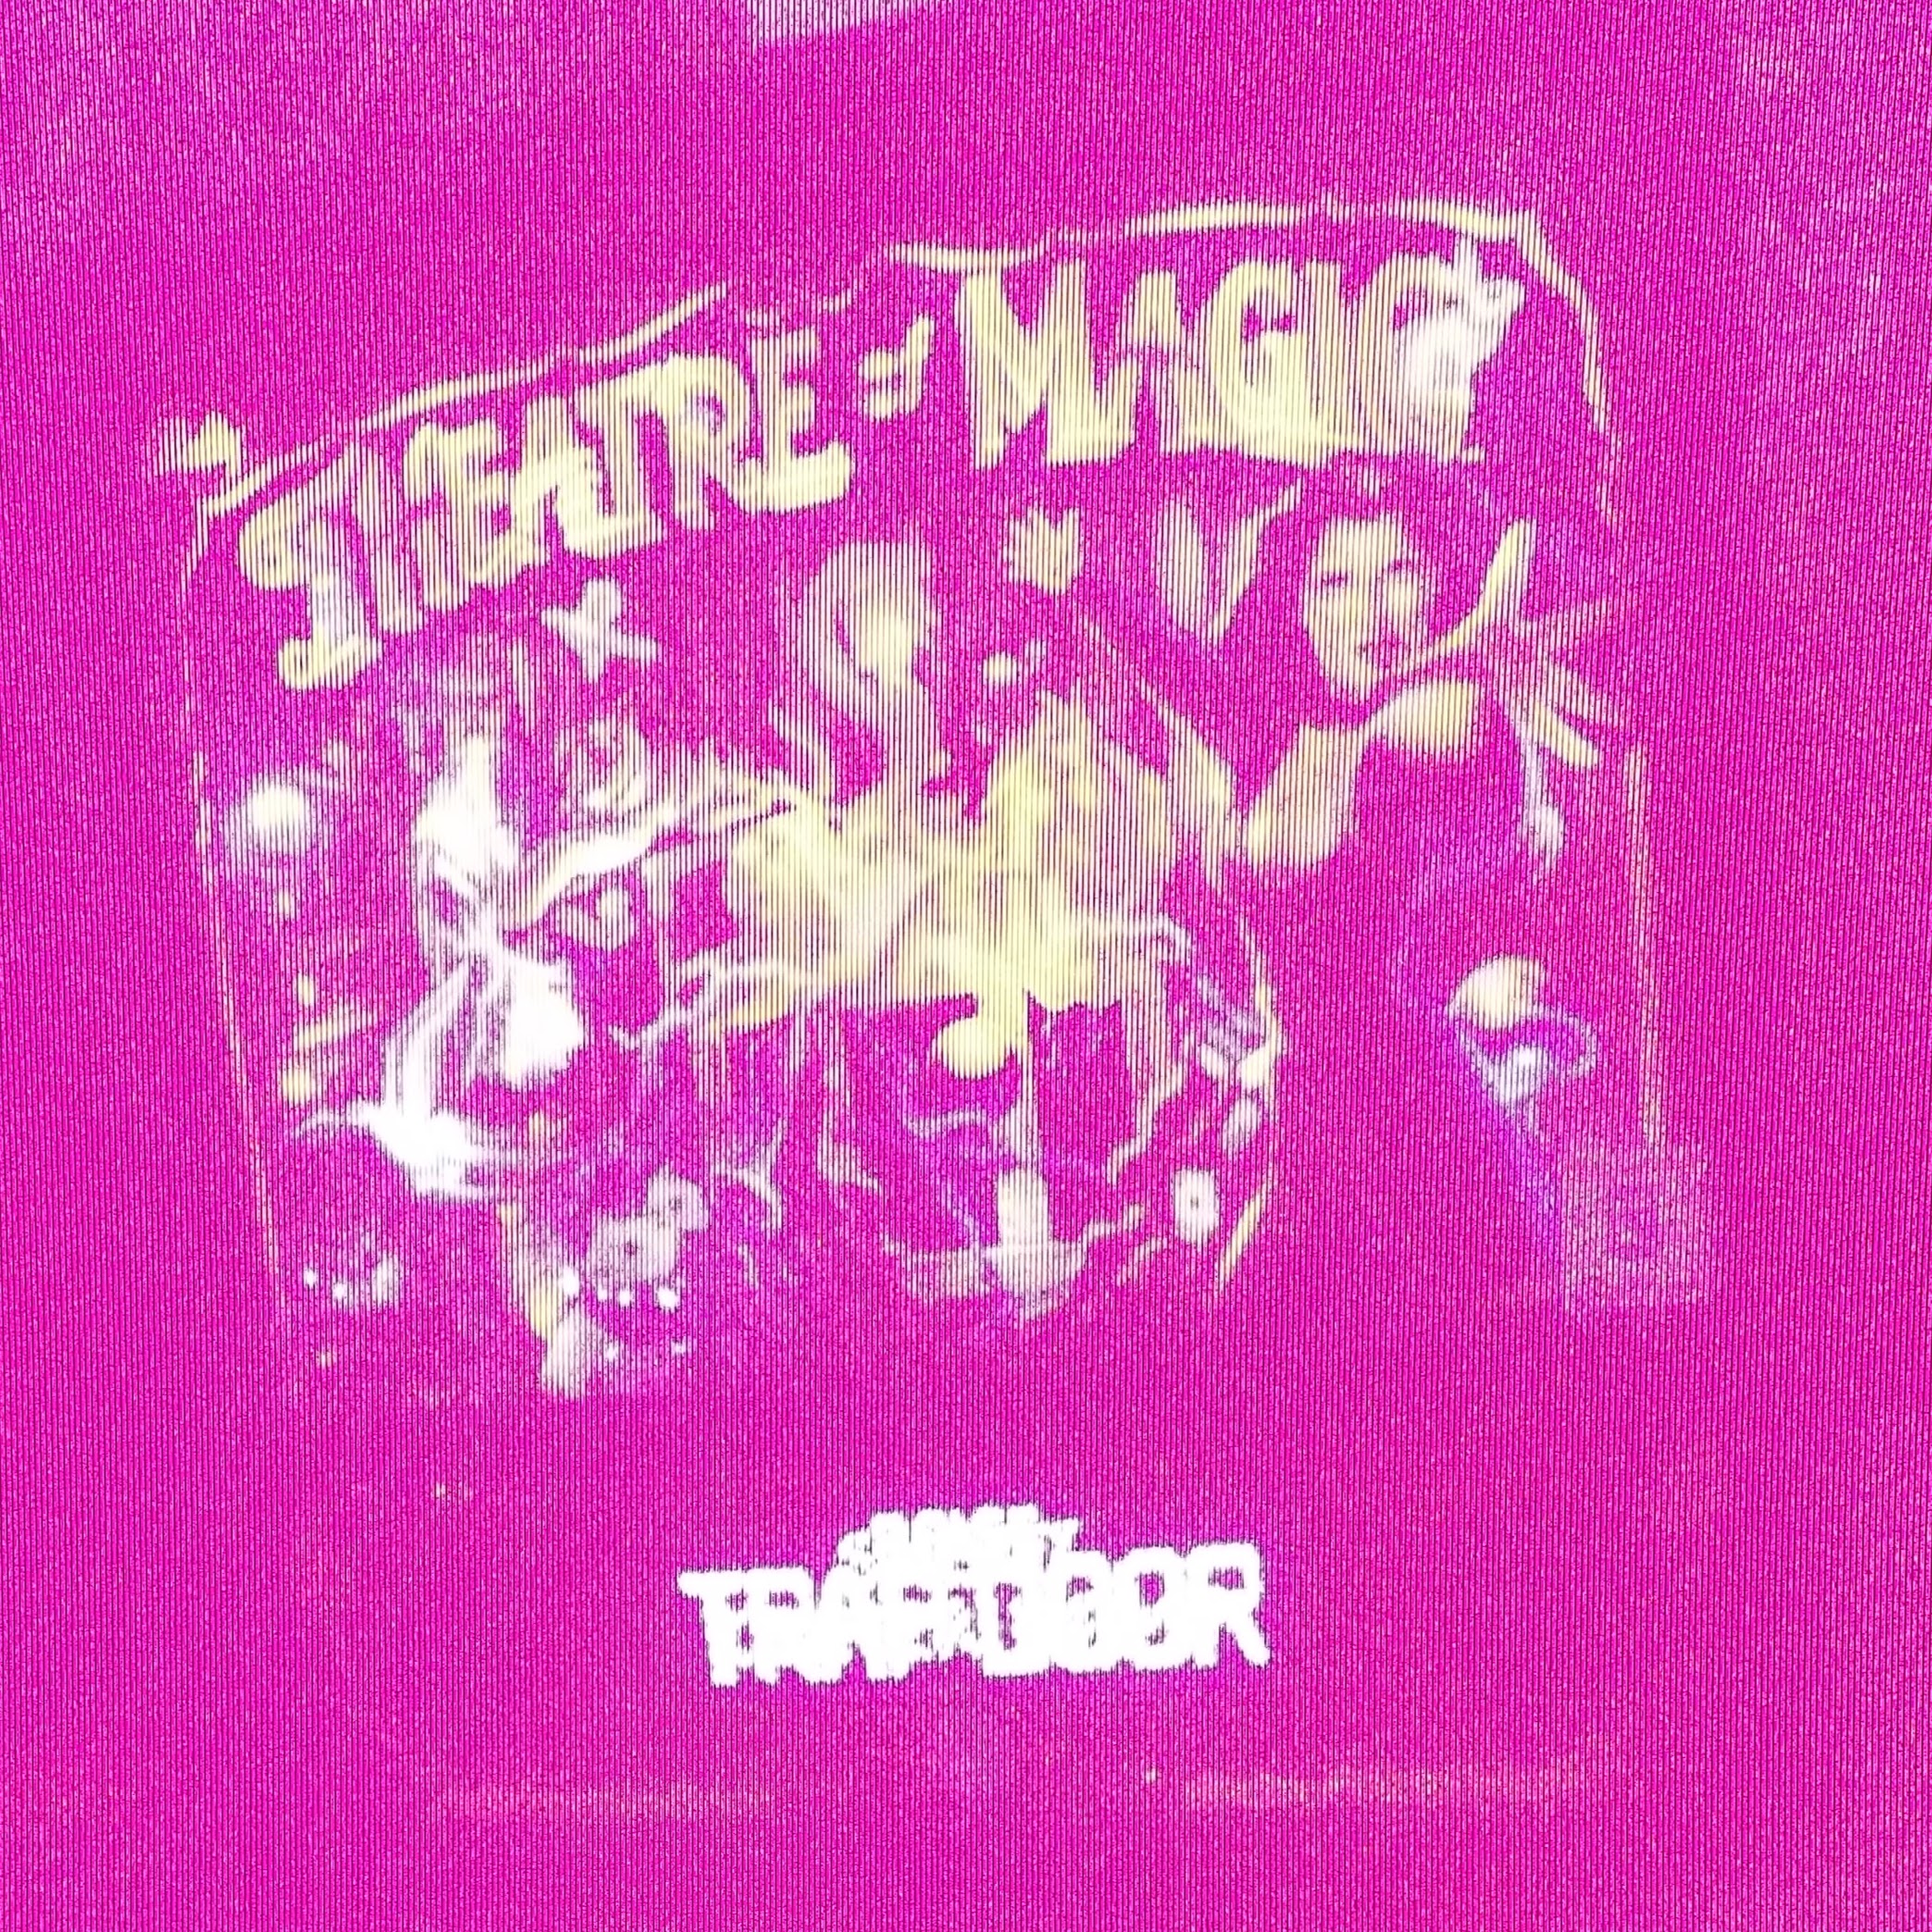 Sample photo taken with the Schrodinger Glitch Camera of a pinball machine called Theatre of Magic